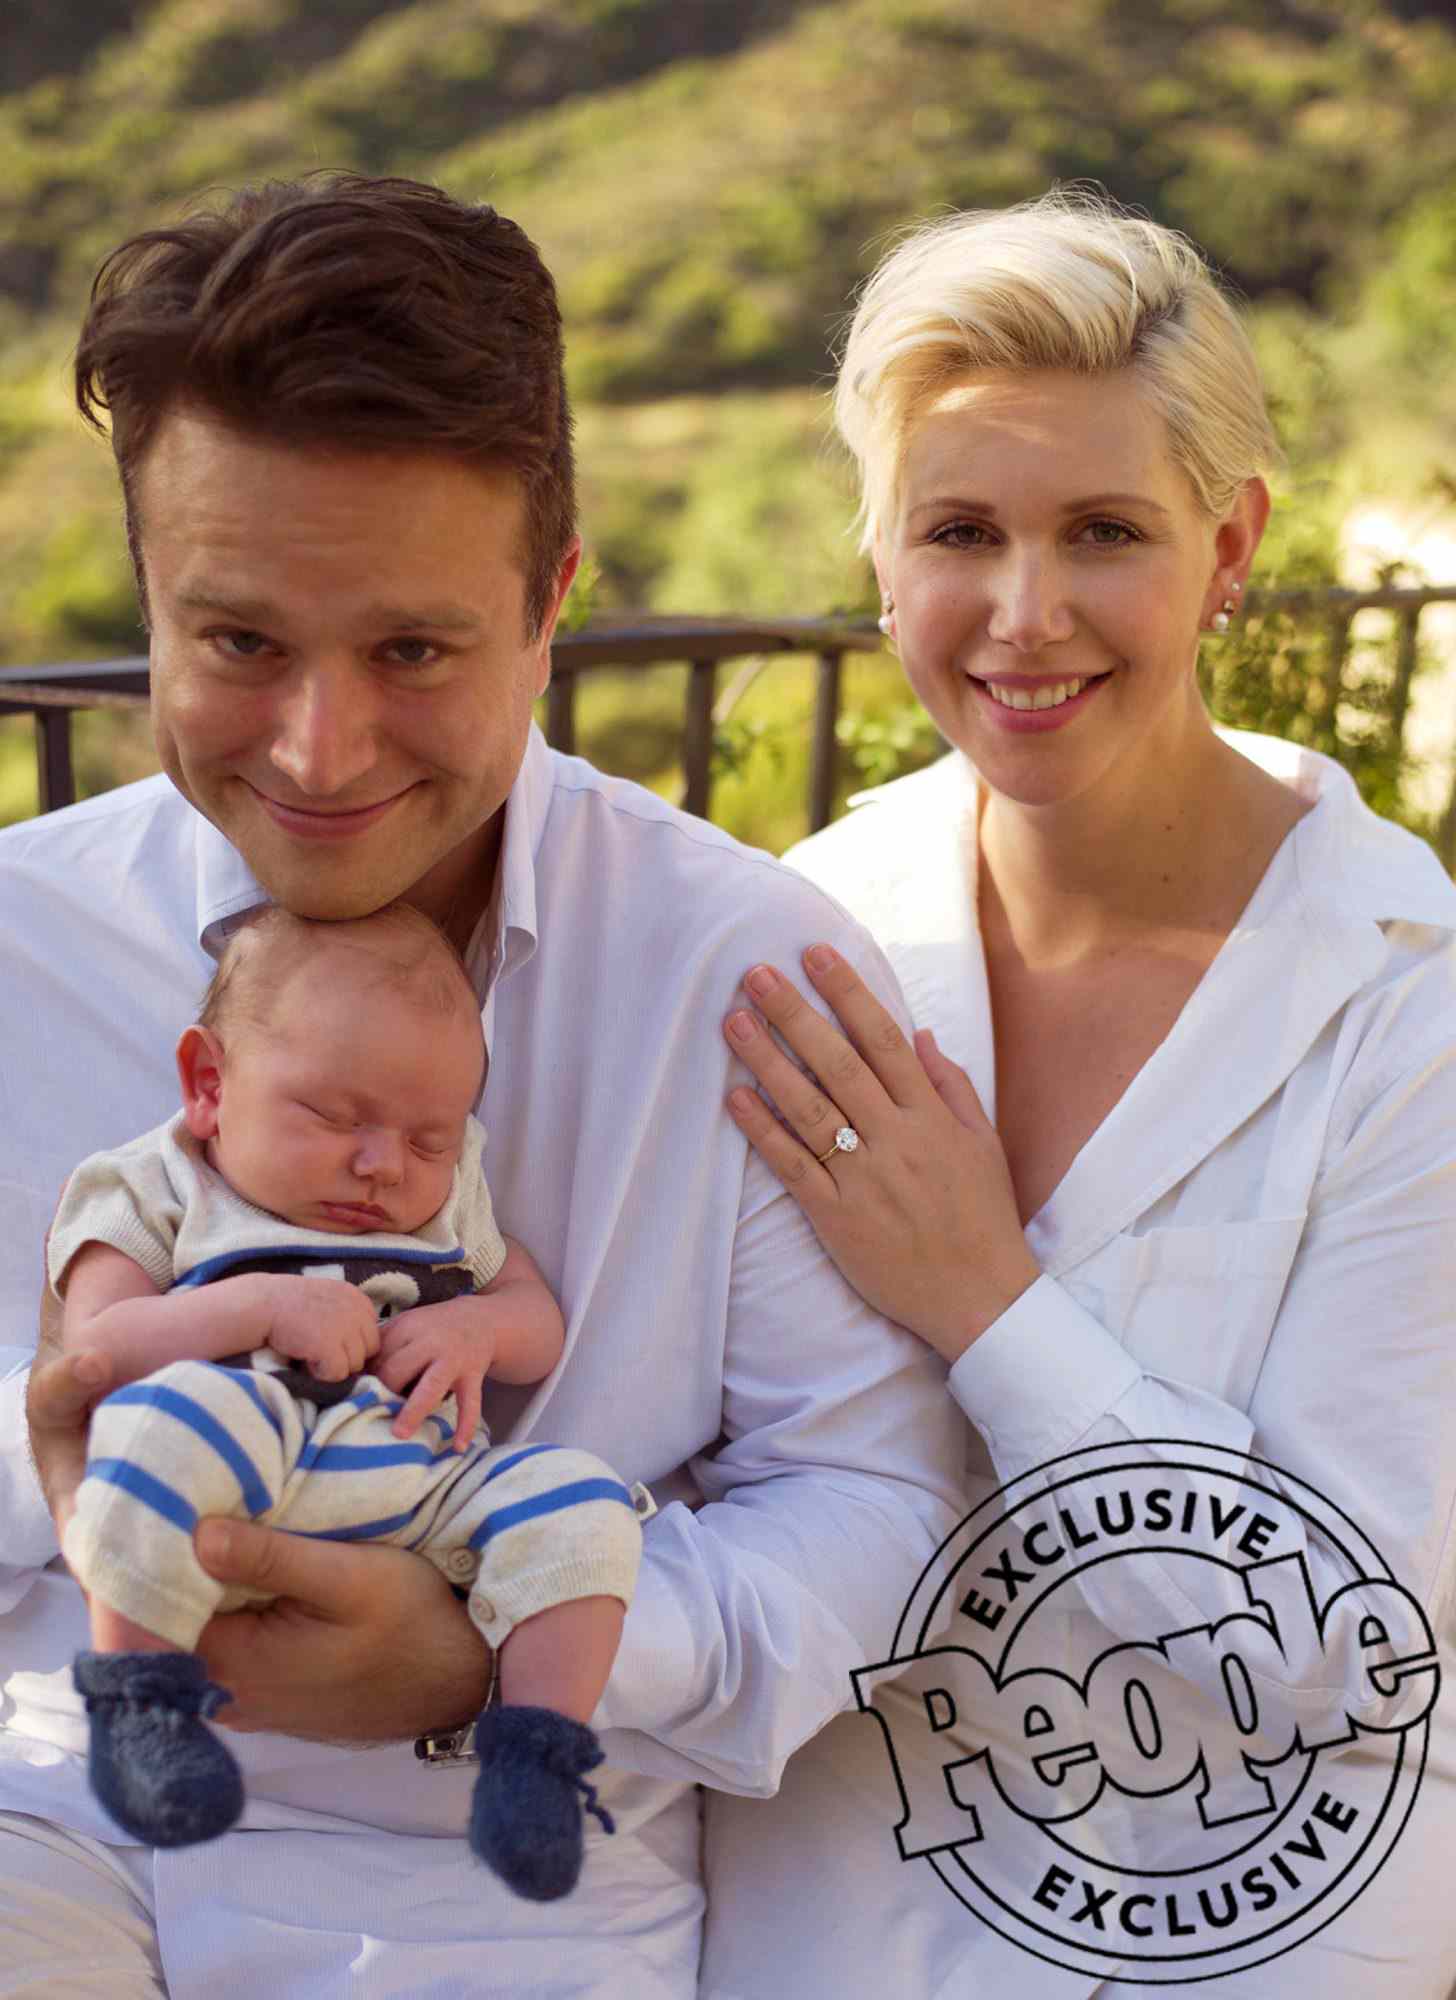 <p>Zak Williams, the oldest child of the late Robin Williams, welcomed his first child with fianc&eacute;e Olivia June on May 22, a rep confirmed exclusively to PEOPLE. </p>
                            <p>The baby boy's name is a tribute to Robin, whose middle name was McLaurin. The couple will call him Mickey for short.</p>
                            <p>Their new little one weighed in at 8 lbs. and measured 20&frac12; inches. </p>
                            